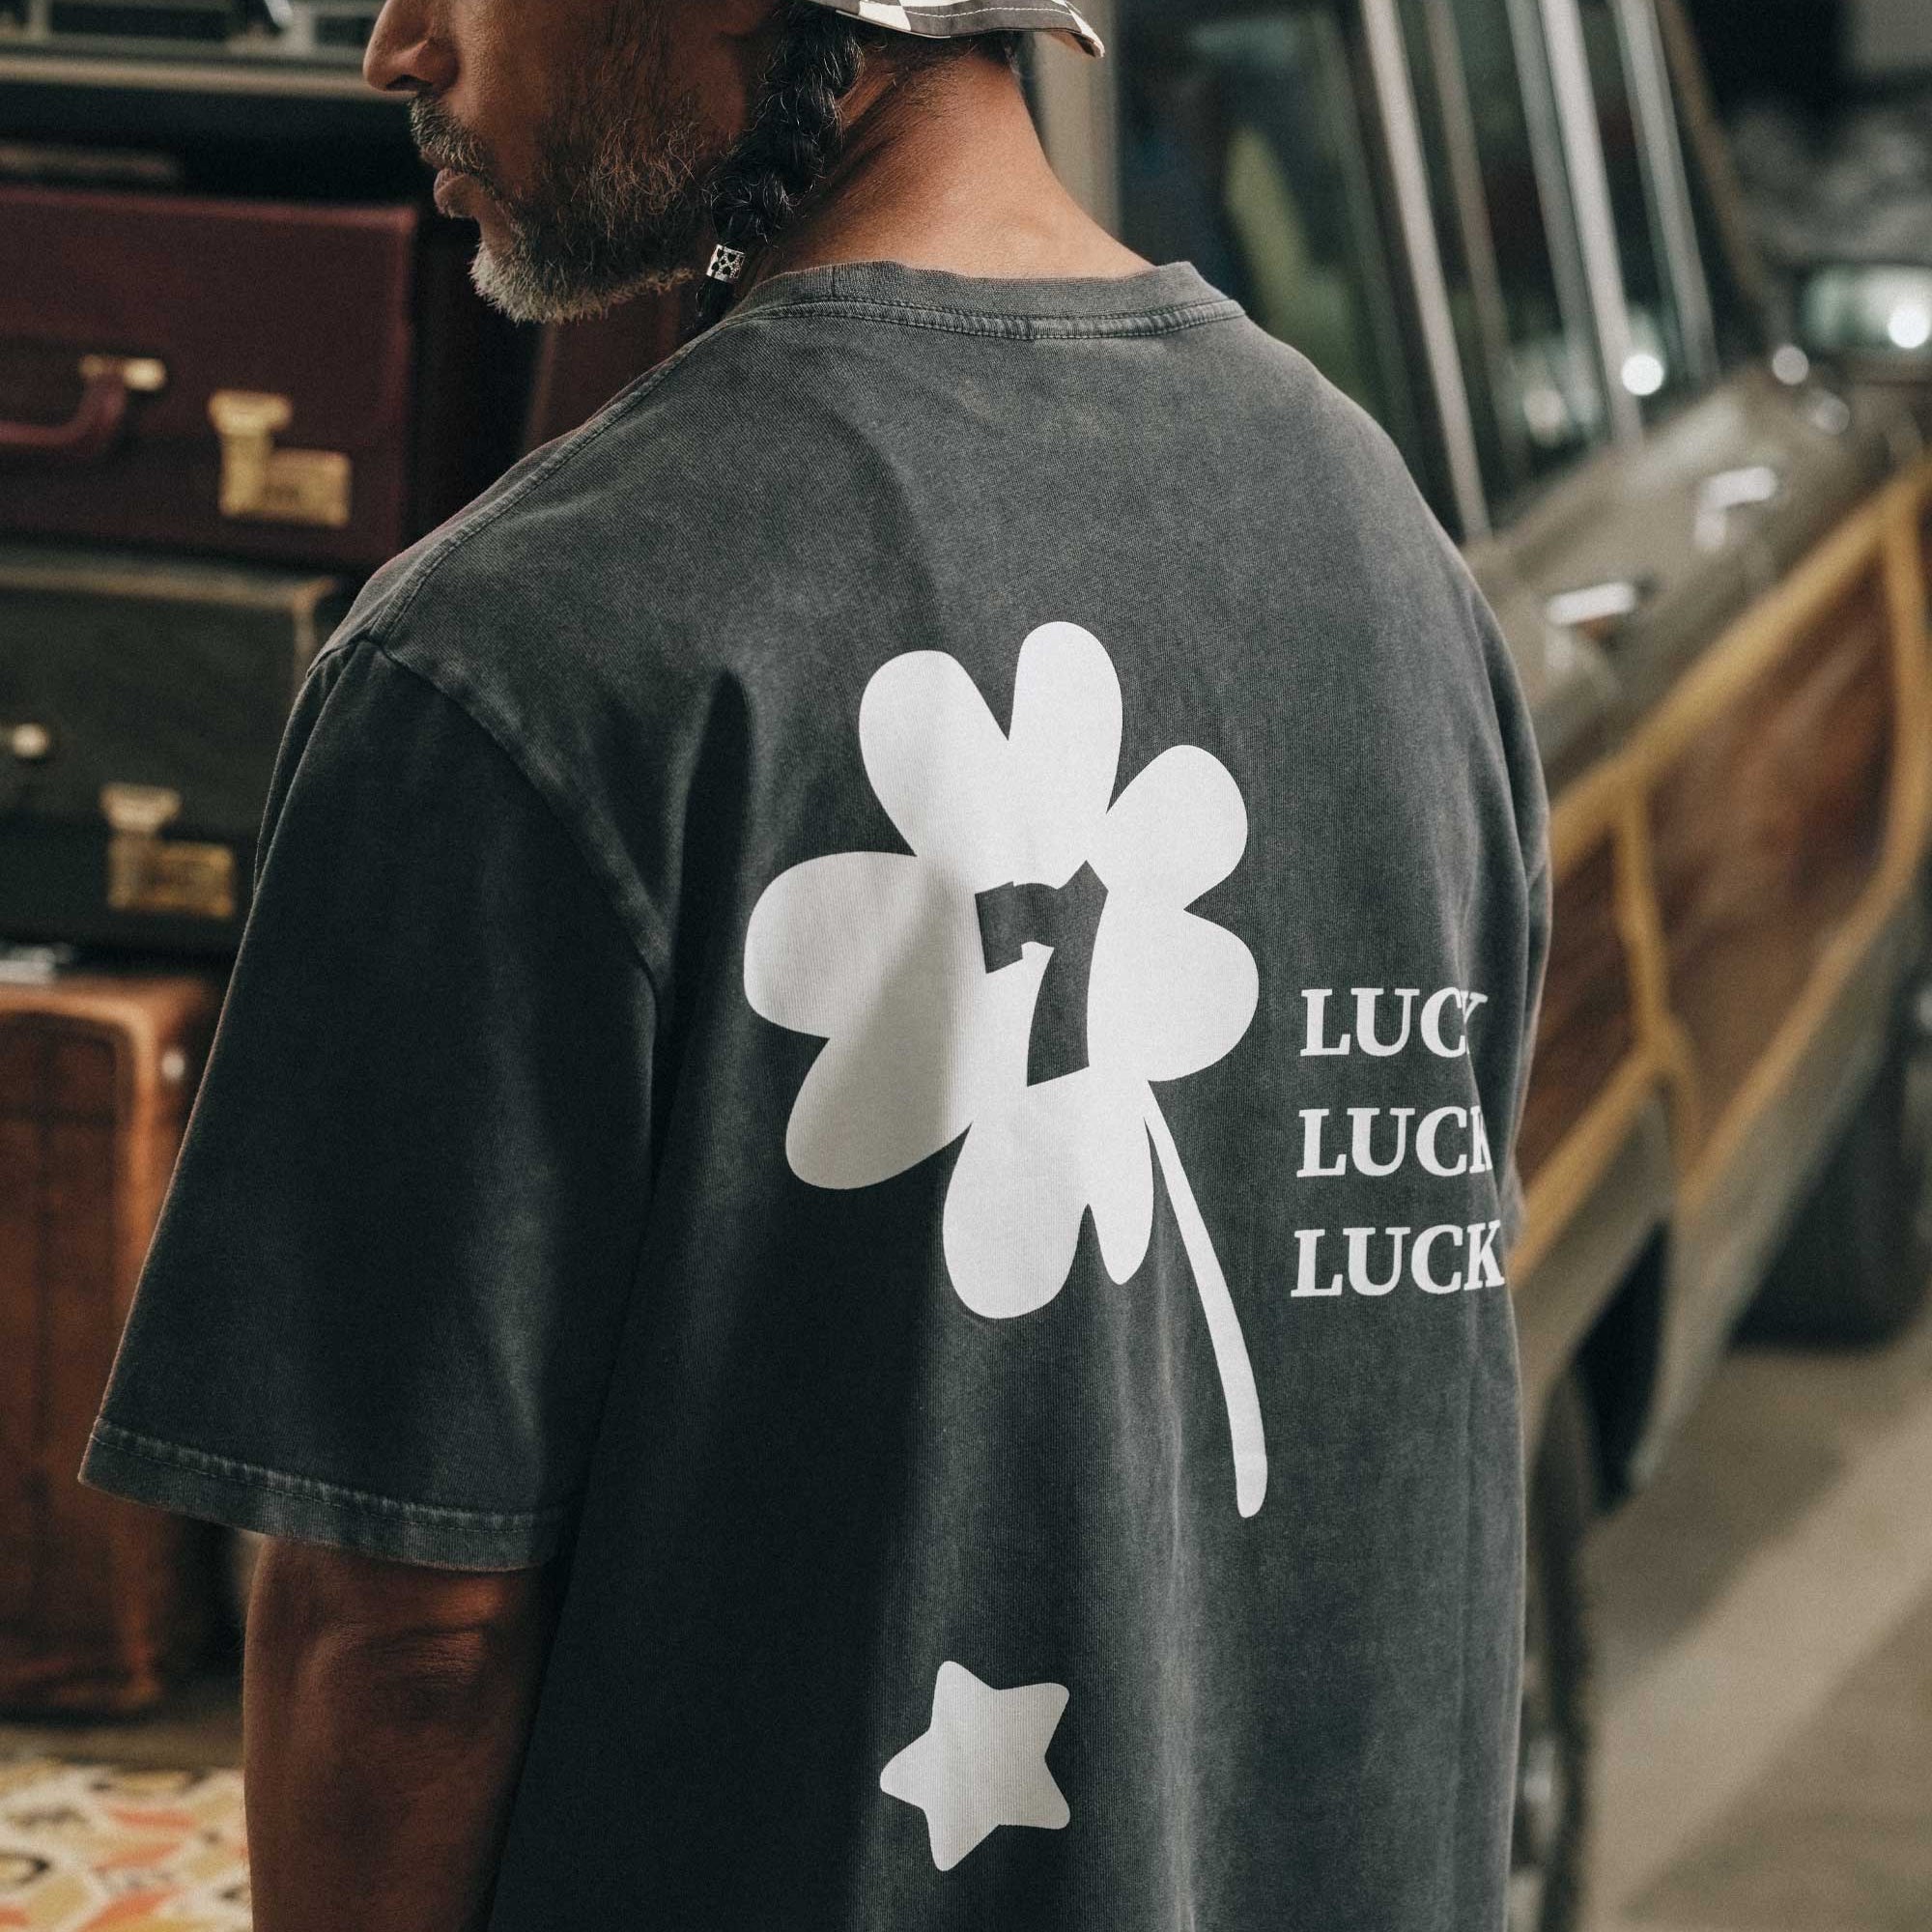 Back view of male model wearing a black t-shirt with white "Lucky" back print.